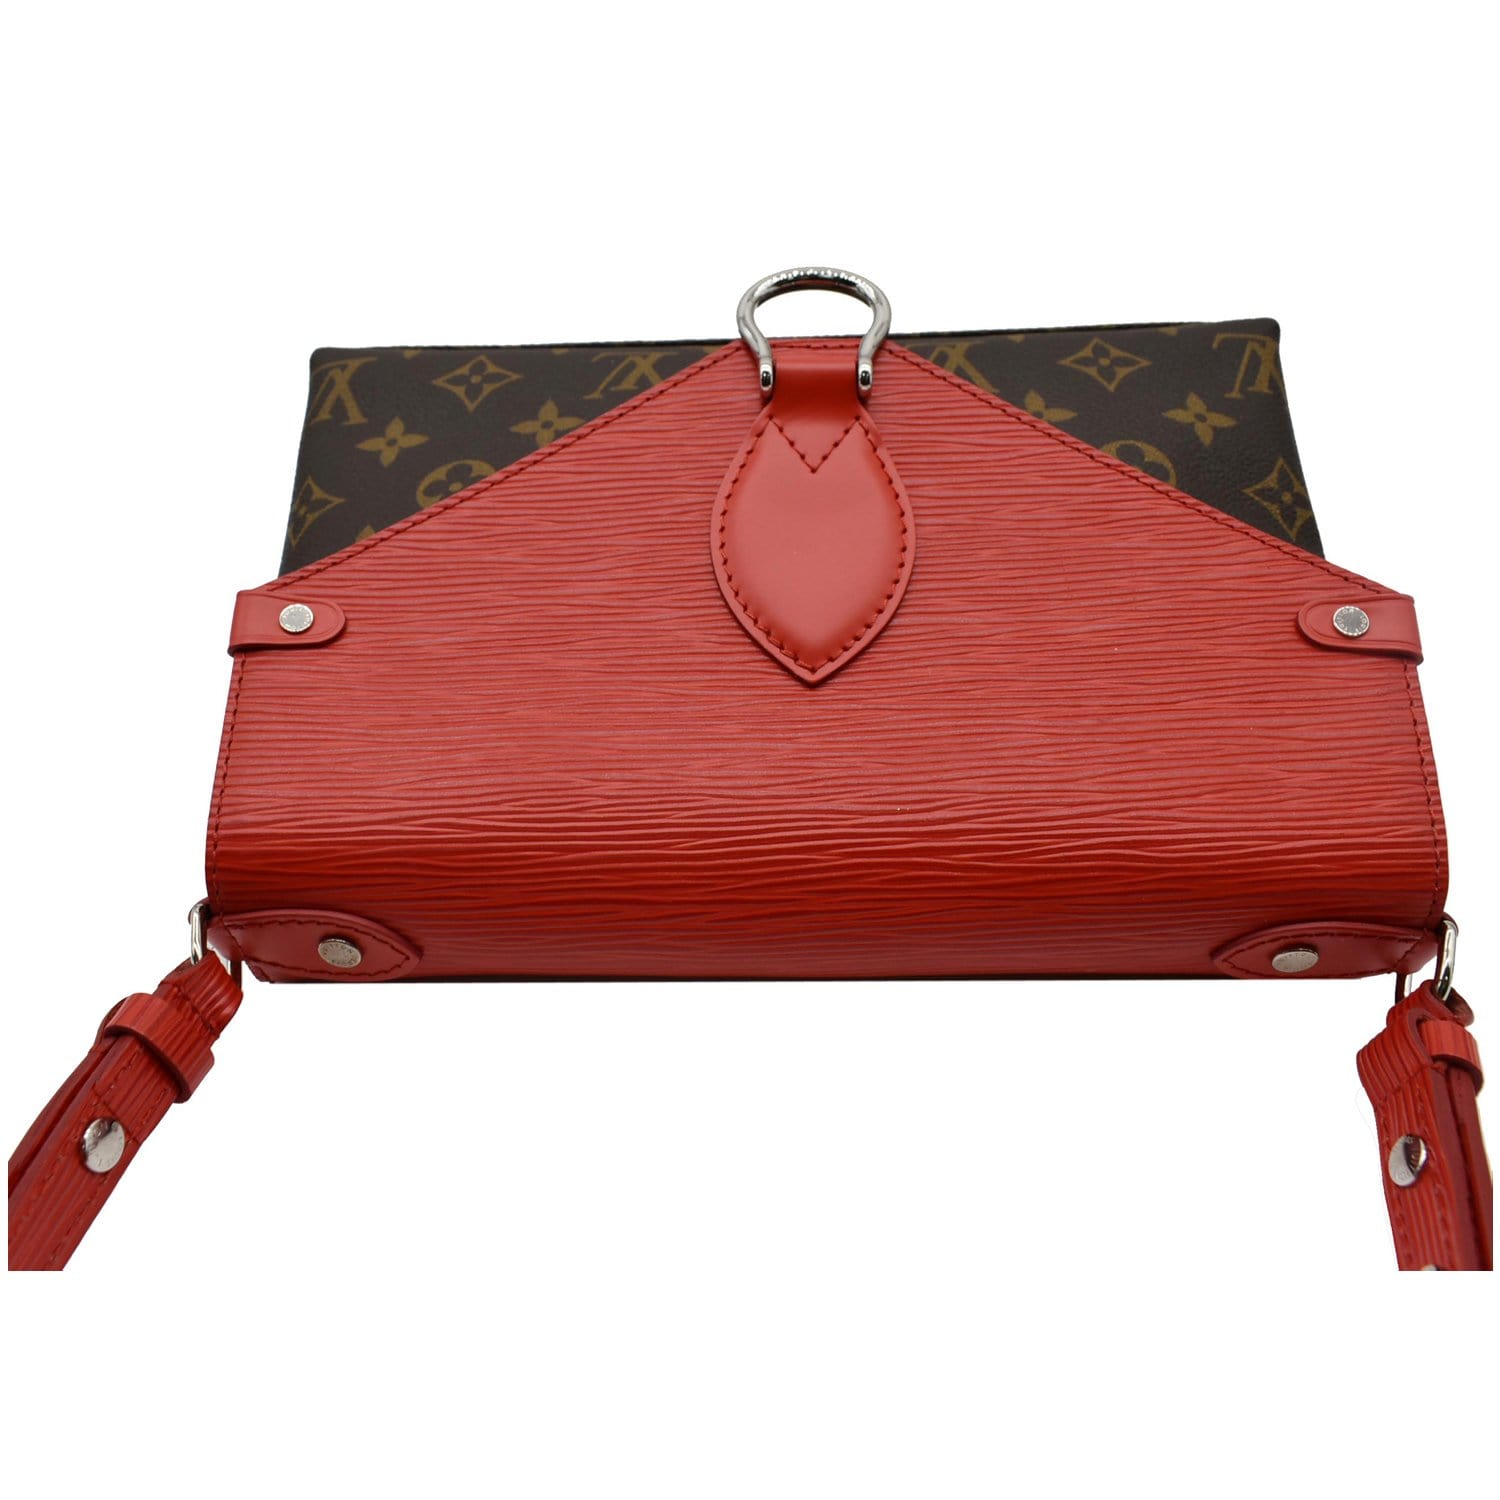 Louis Vuitton Red Epi Leather Sac Montaigne at Jill's Consignment